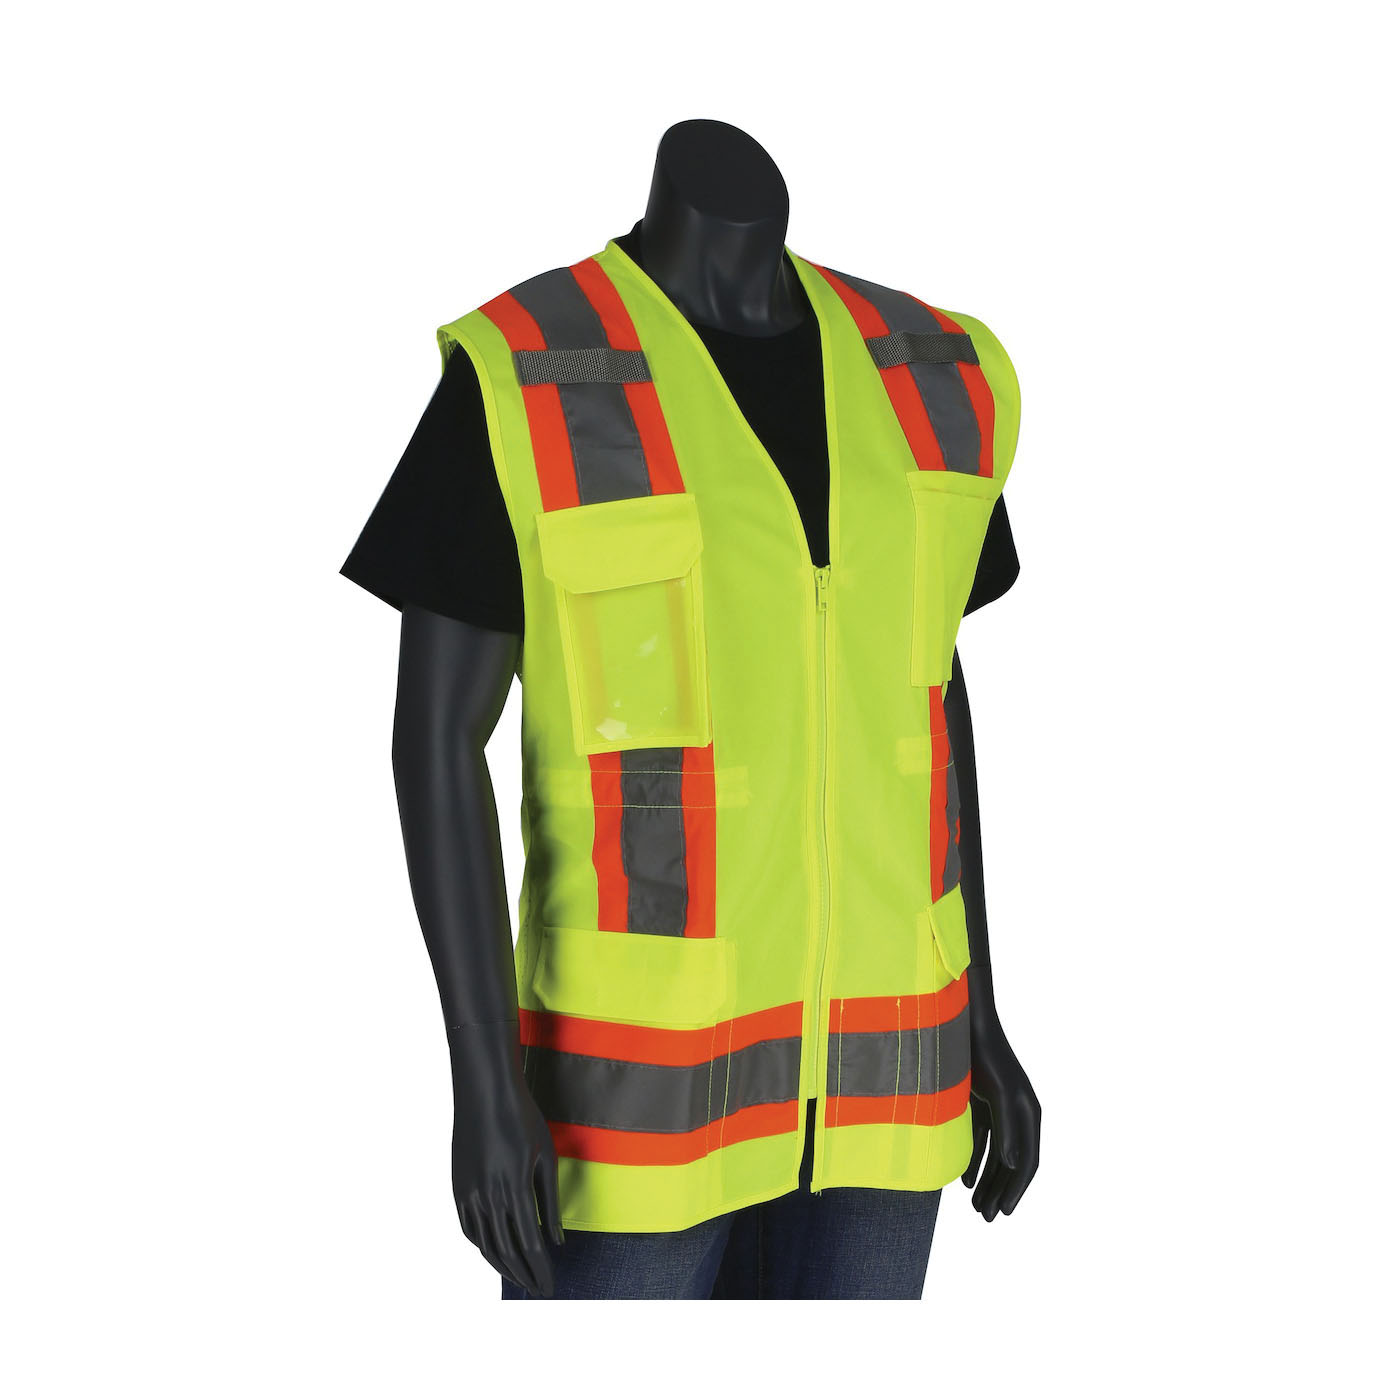 PIP® 302-0512-LY/M 2-Tone Contoured Surveyor's Vest With Solid Front and Mesh Back, M, Hi-Vis Yellow, 100% Polyester Mesh/Solid Tricot Knit, Zipper Closure, 11 Pockets, ANSI Class: Type/Class R2